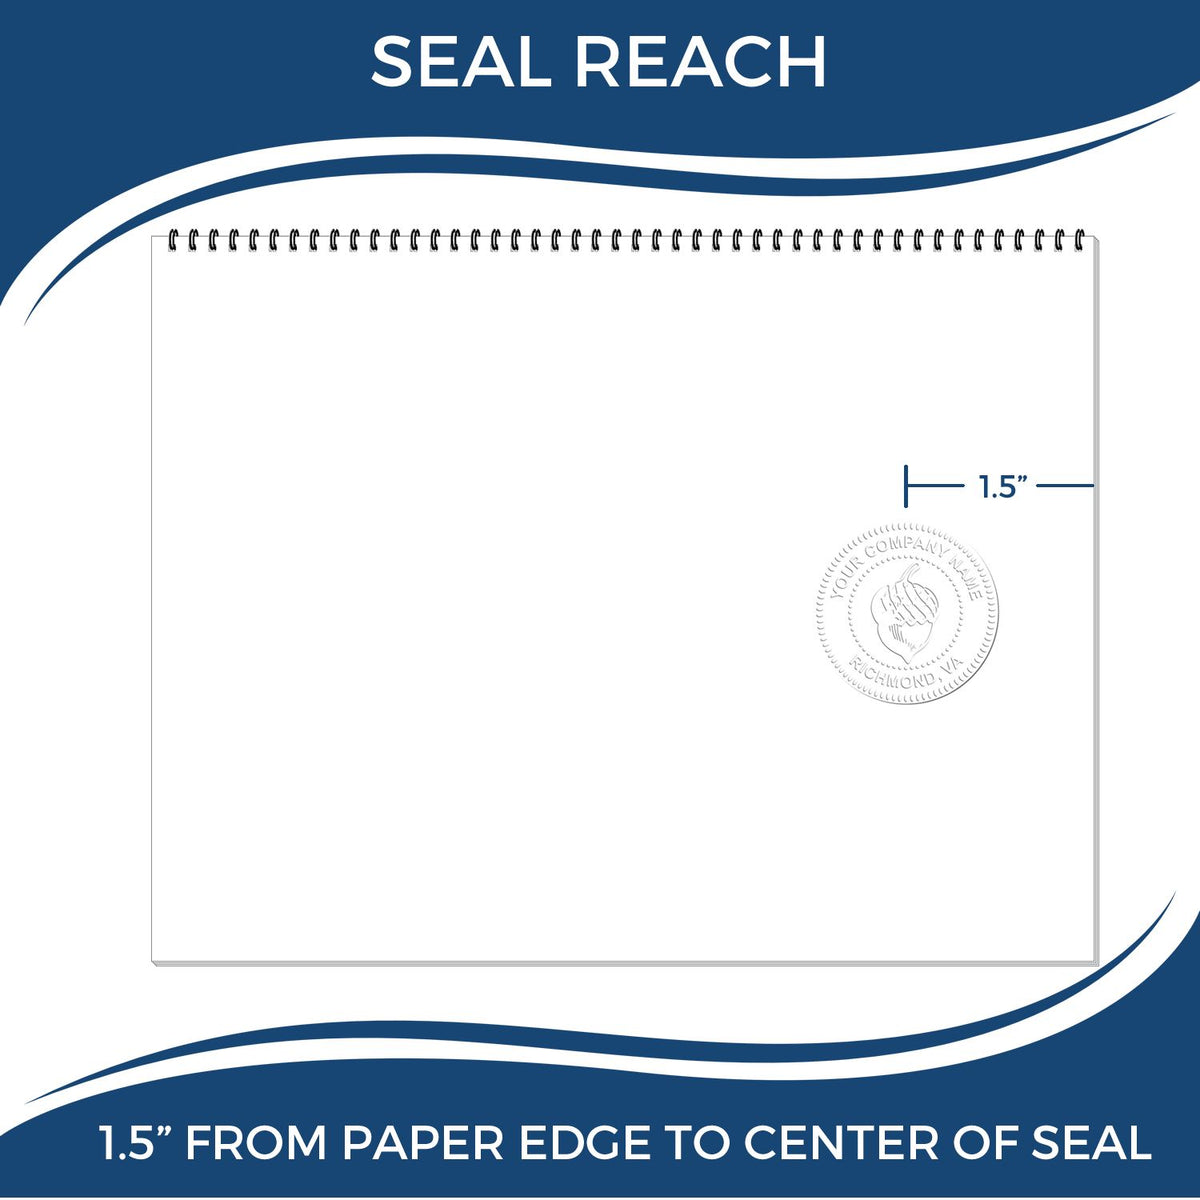 An infographic showing the seal reach which is represented by a ruler and a miniature seal image of the Hybrid New Jersey Geologist Seal